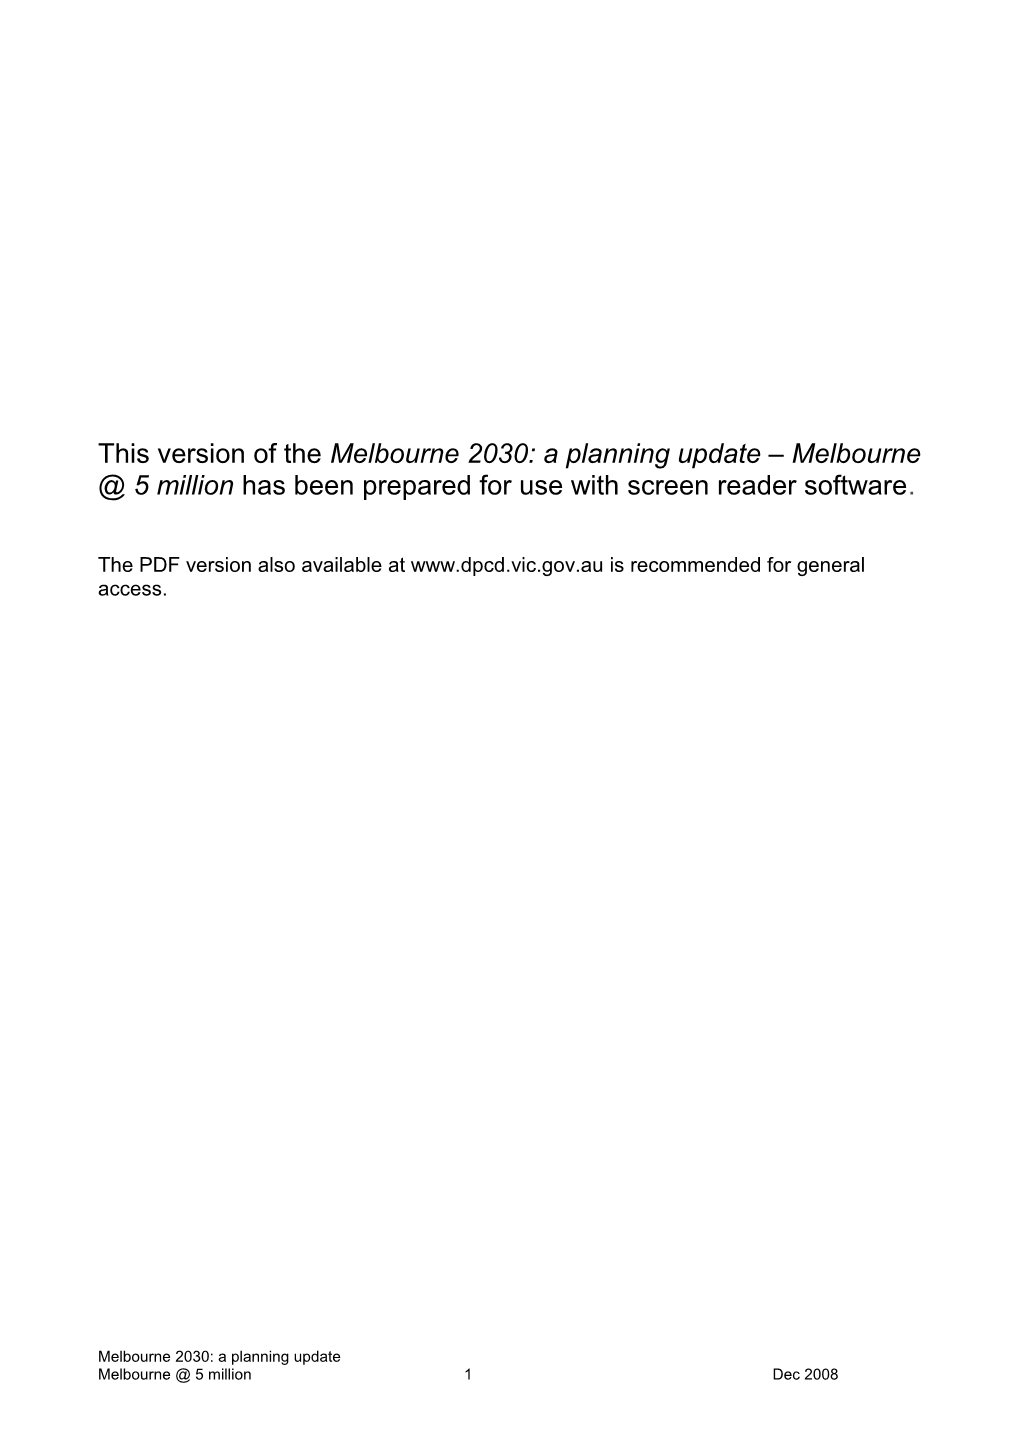 Melbourne 2030: a Planning Update